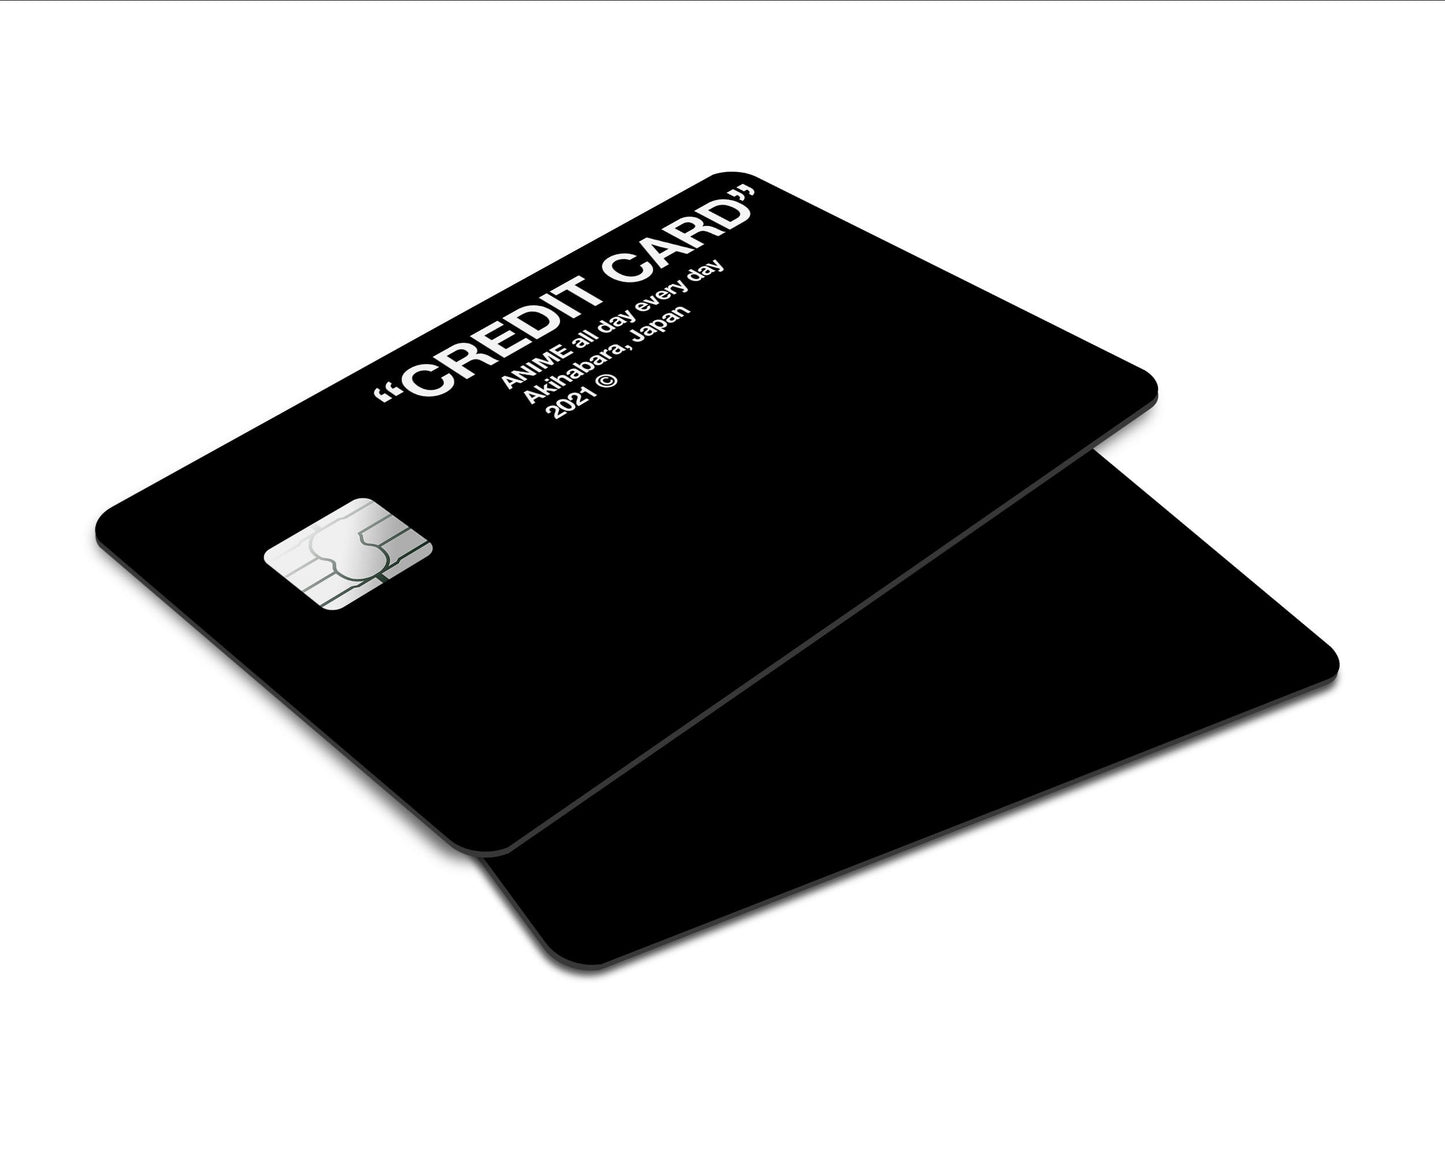 Anime Town Creations Credit Card Off-White Inspired "Credit" Card - Anime All Day Everyday Window Skins - Anime Quotes Skin